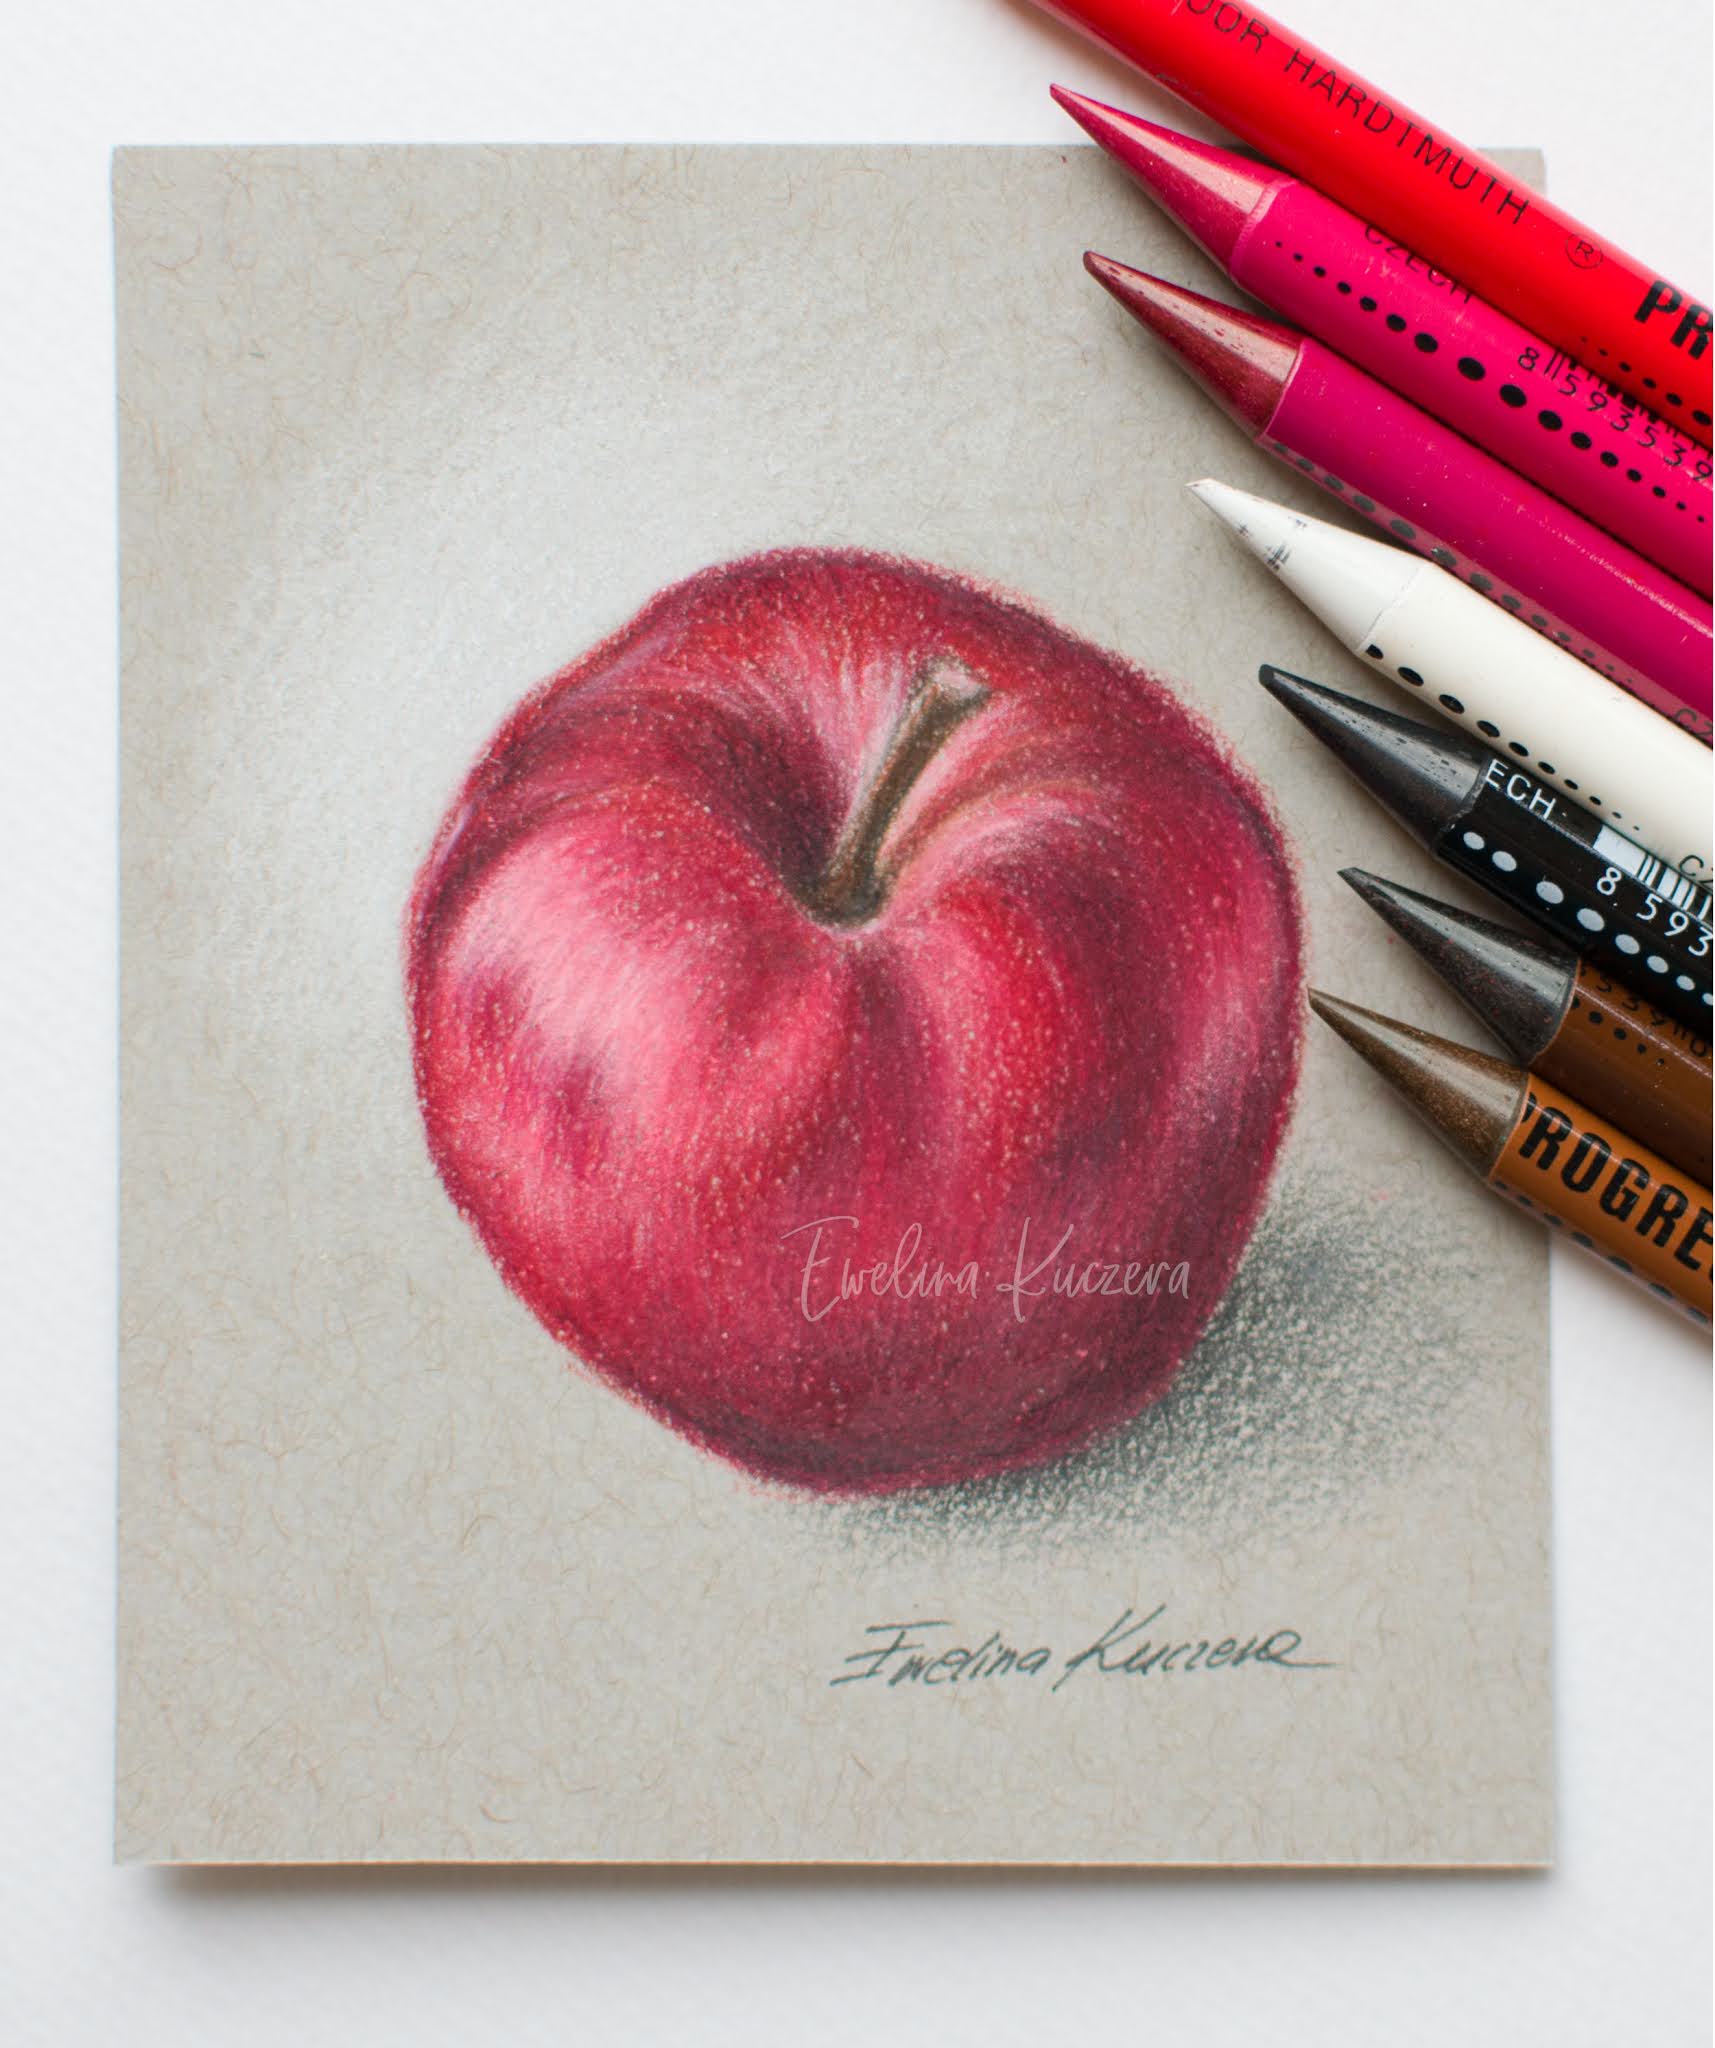 Artistic Blog - learn how to draw with colored pencils: How to